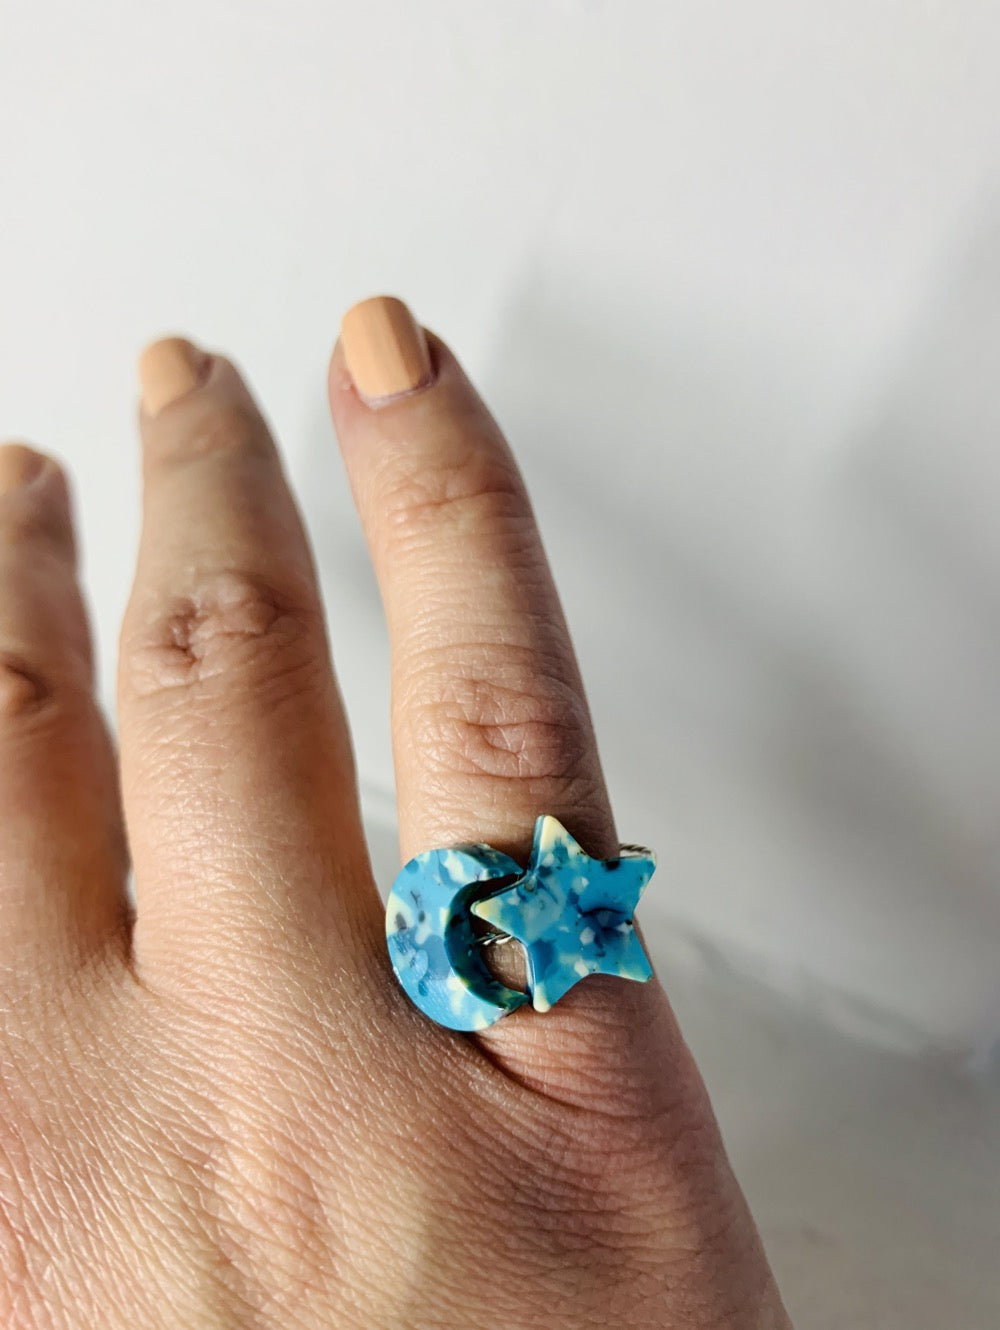 In front of a white background is someone's hand with two rings on their pinky finger. The rings are made from recycled 3D prints with teal, blue, white, and black colors intermixed to be speckled like granite.